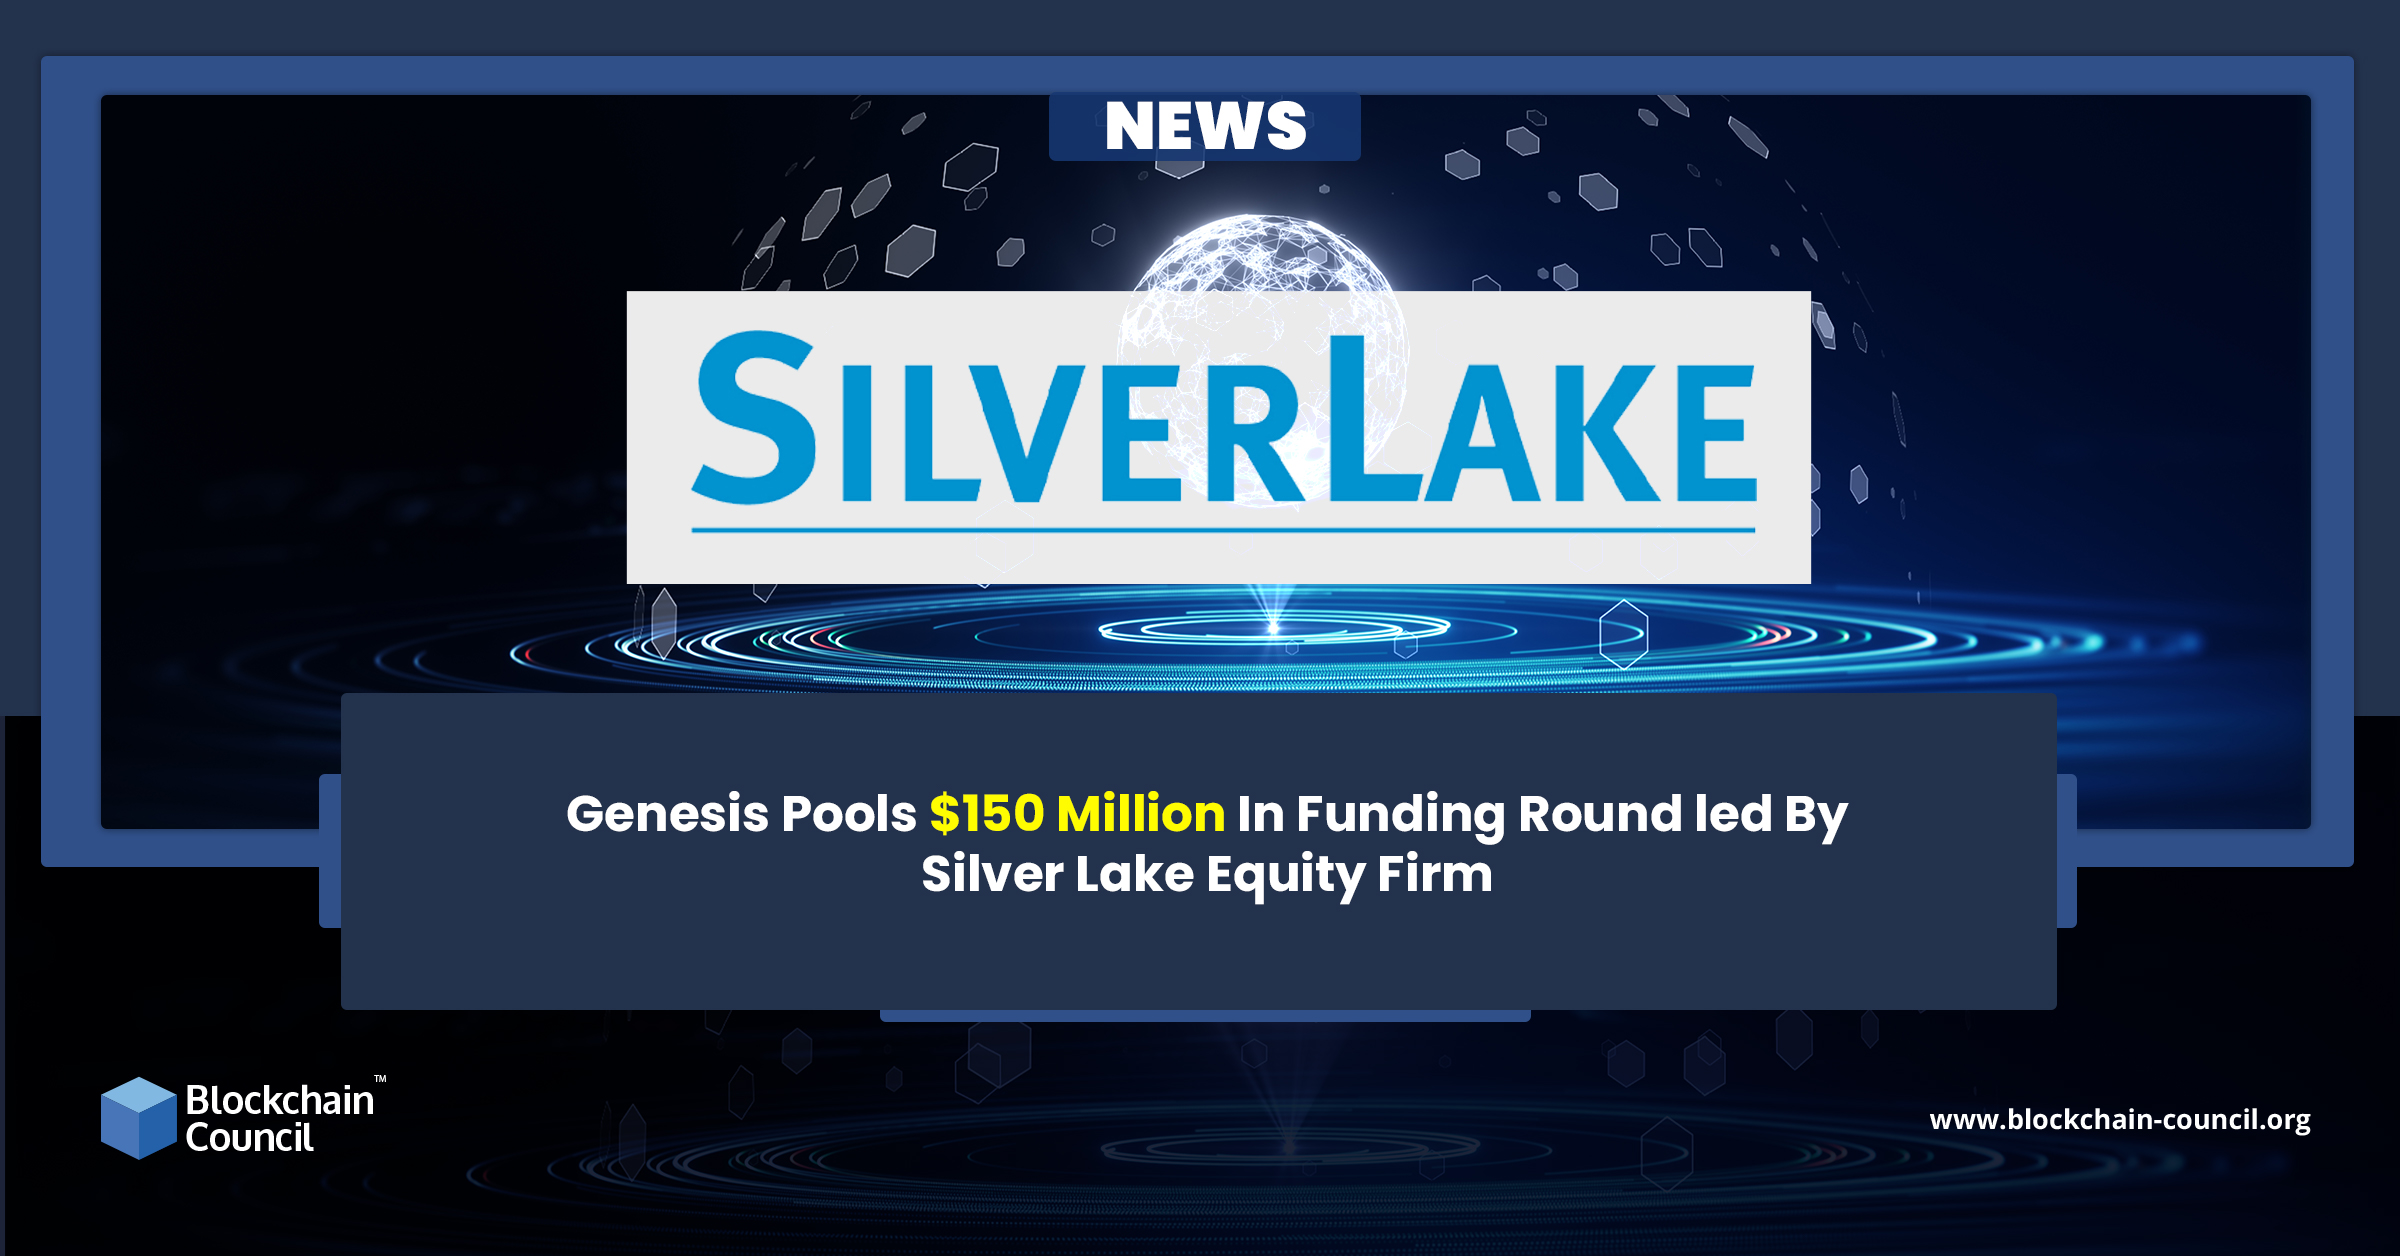 Genesis Pools $150 Million In Funding Round led By Silver Lake Equity Firm